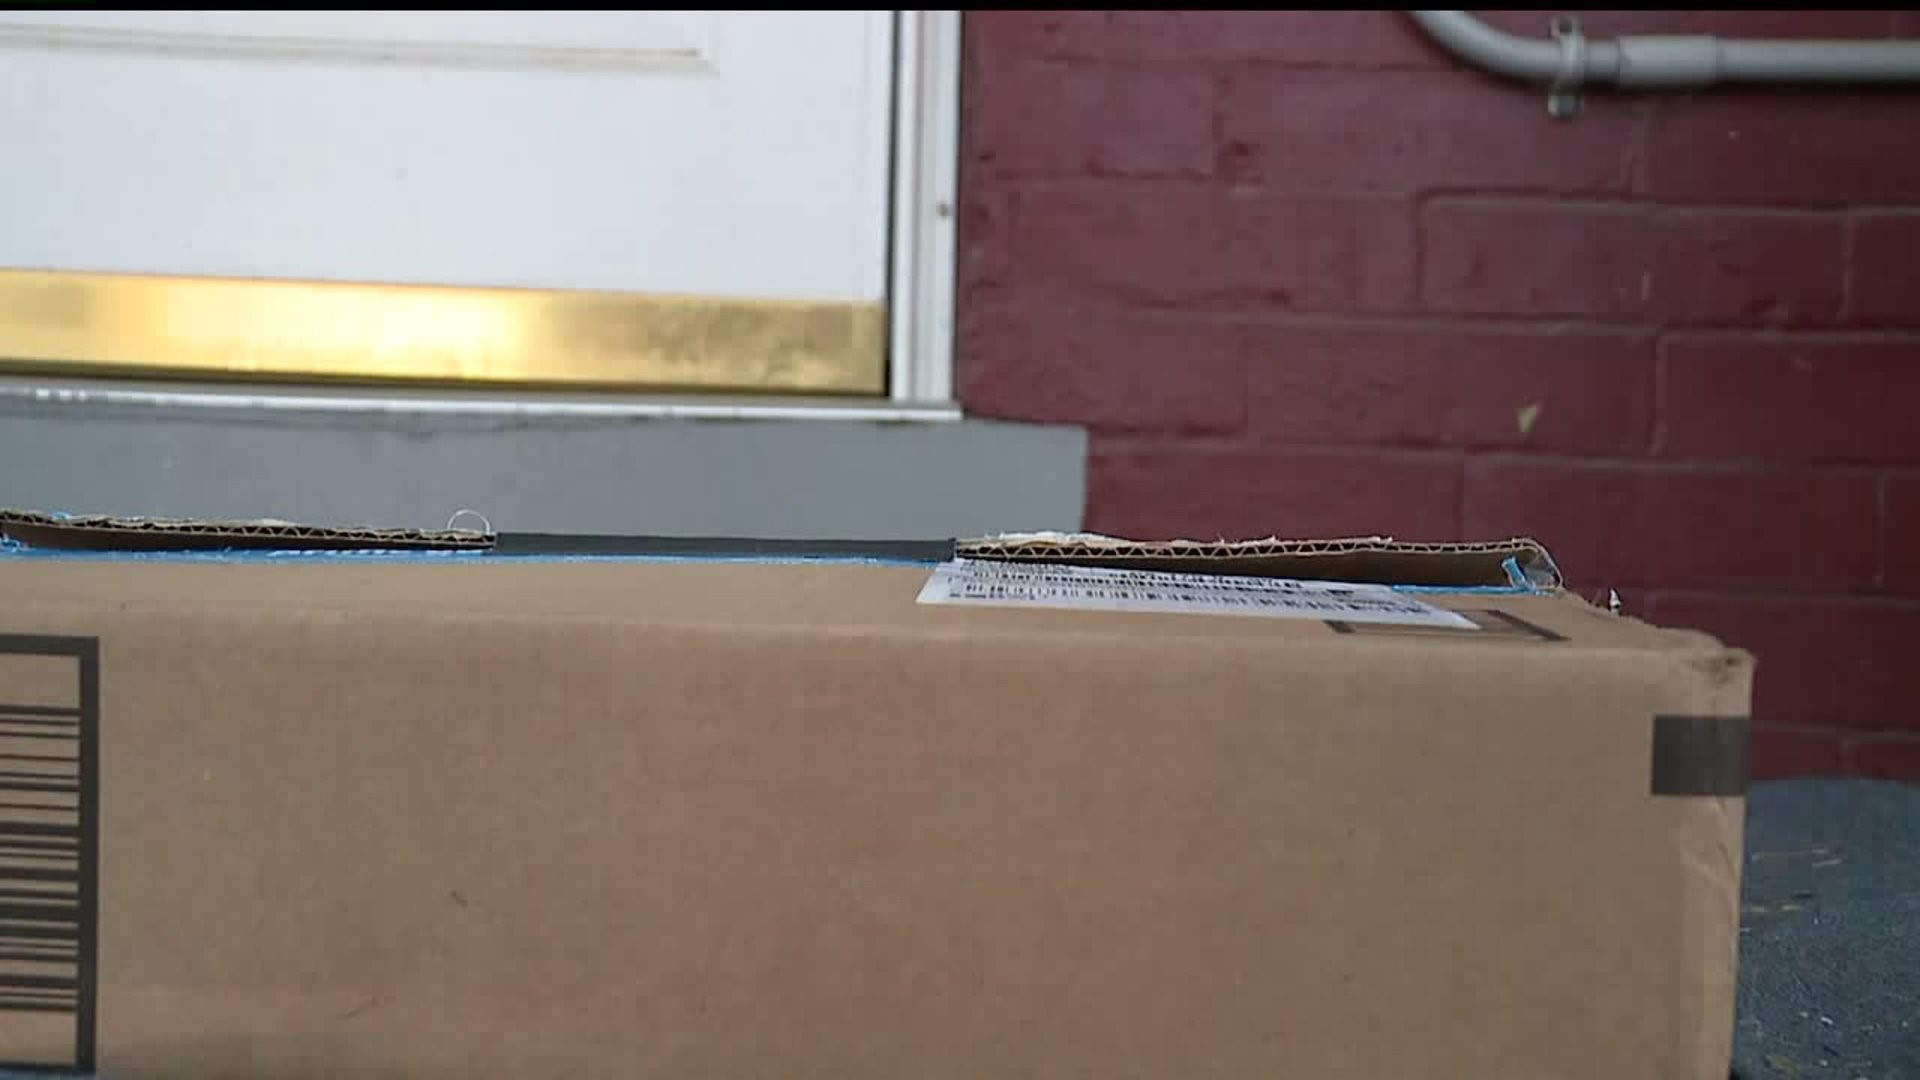 Authorities Warn about Porch Pirates on the Prowl